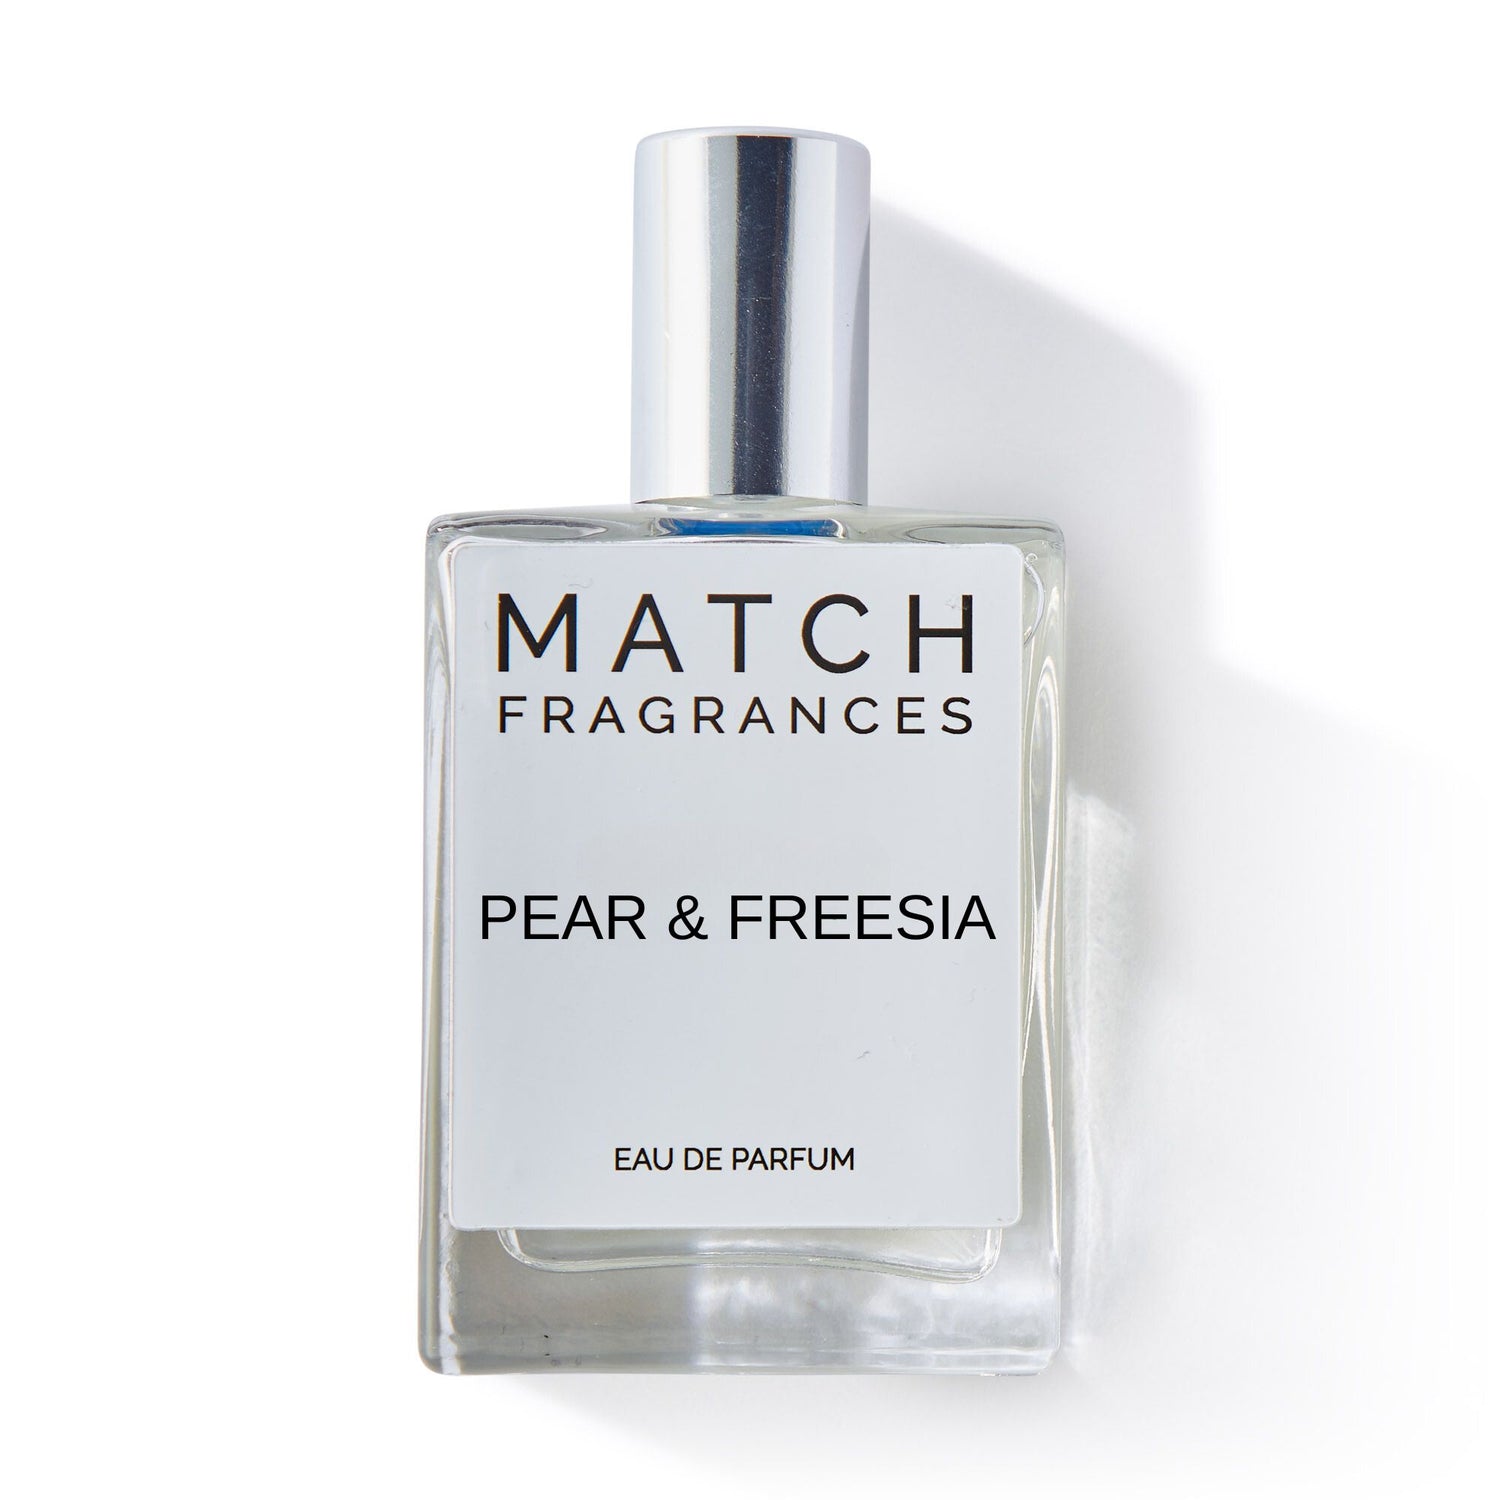 Inspired by Pear &amp; Freesia